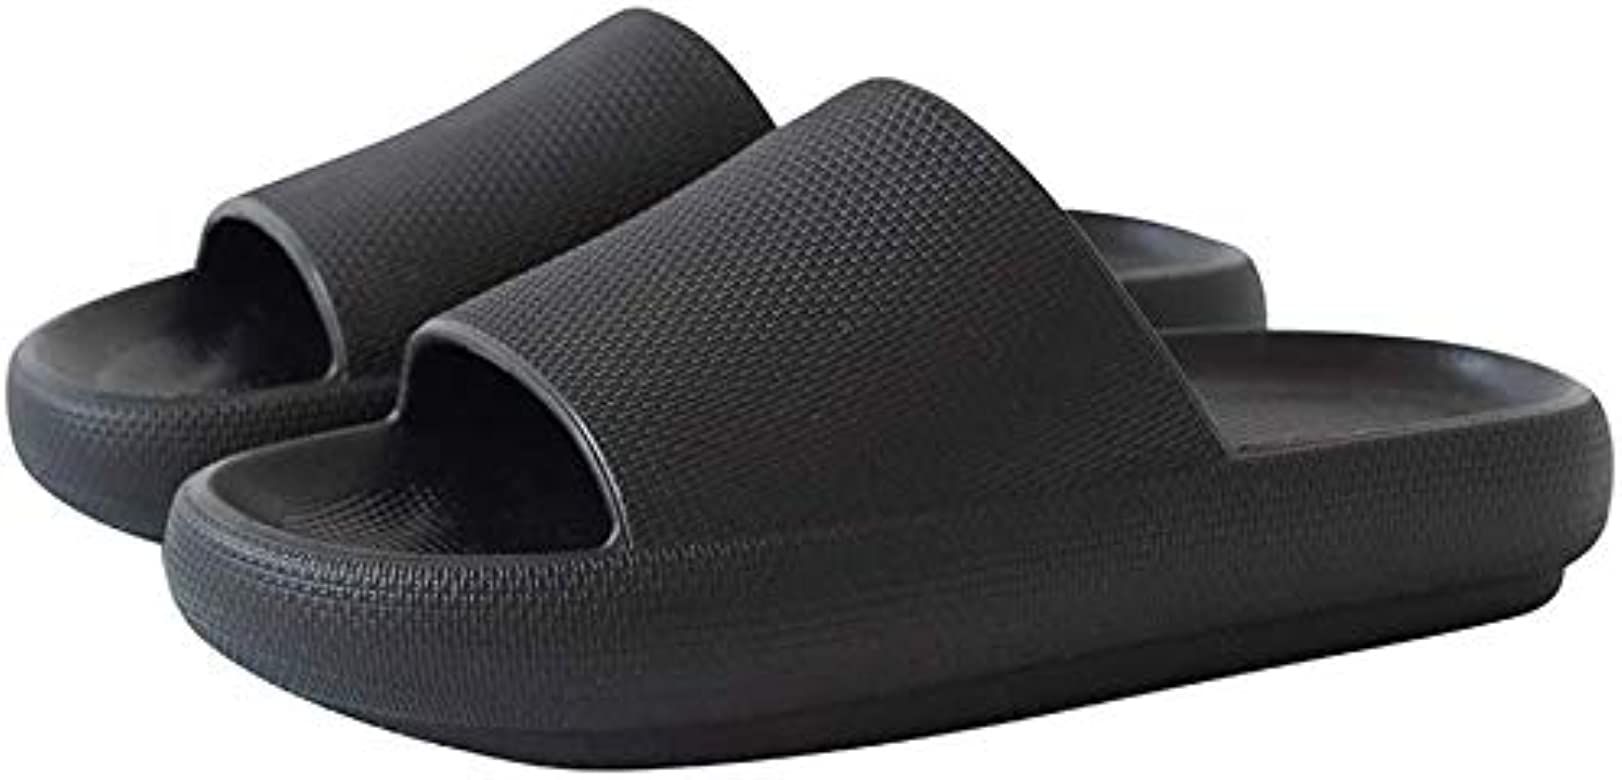 Slippers for Women and Men Quick Drying Slide Sandal with Thick Sole Non-Slip Soft Shower Slippers O | Amazon (US)